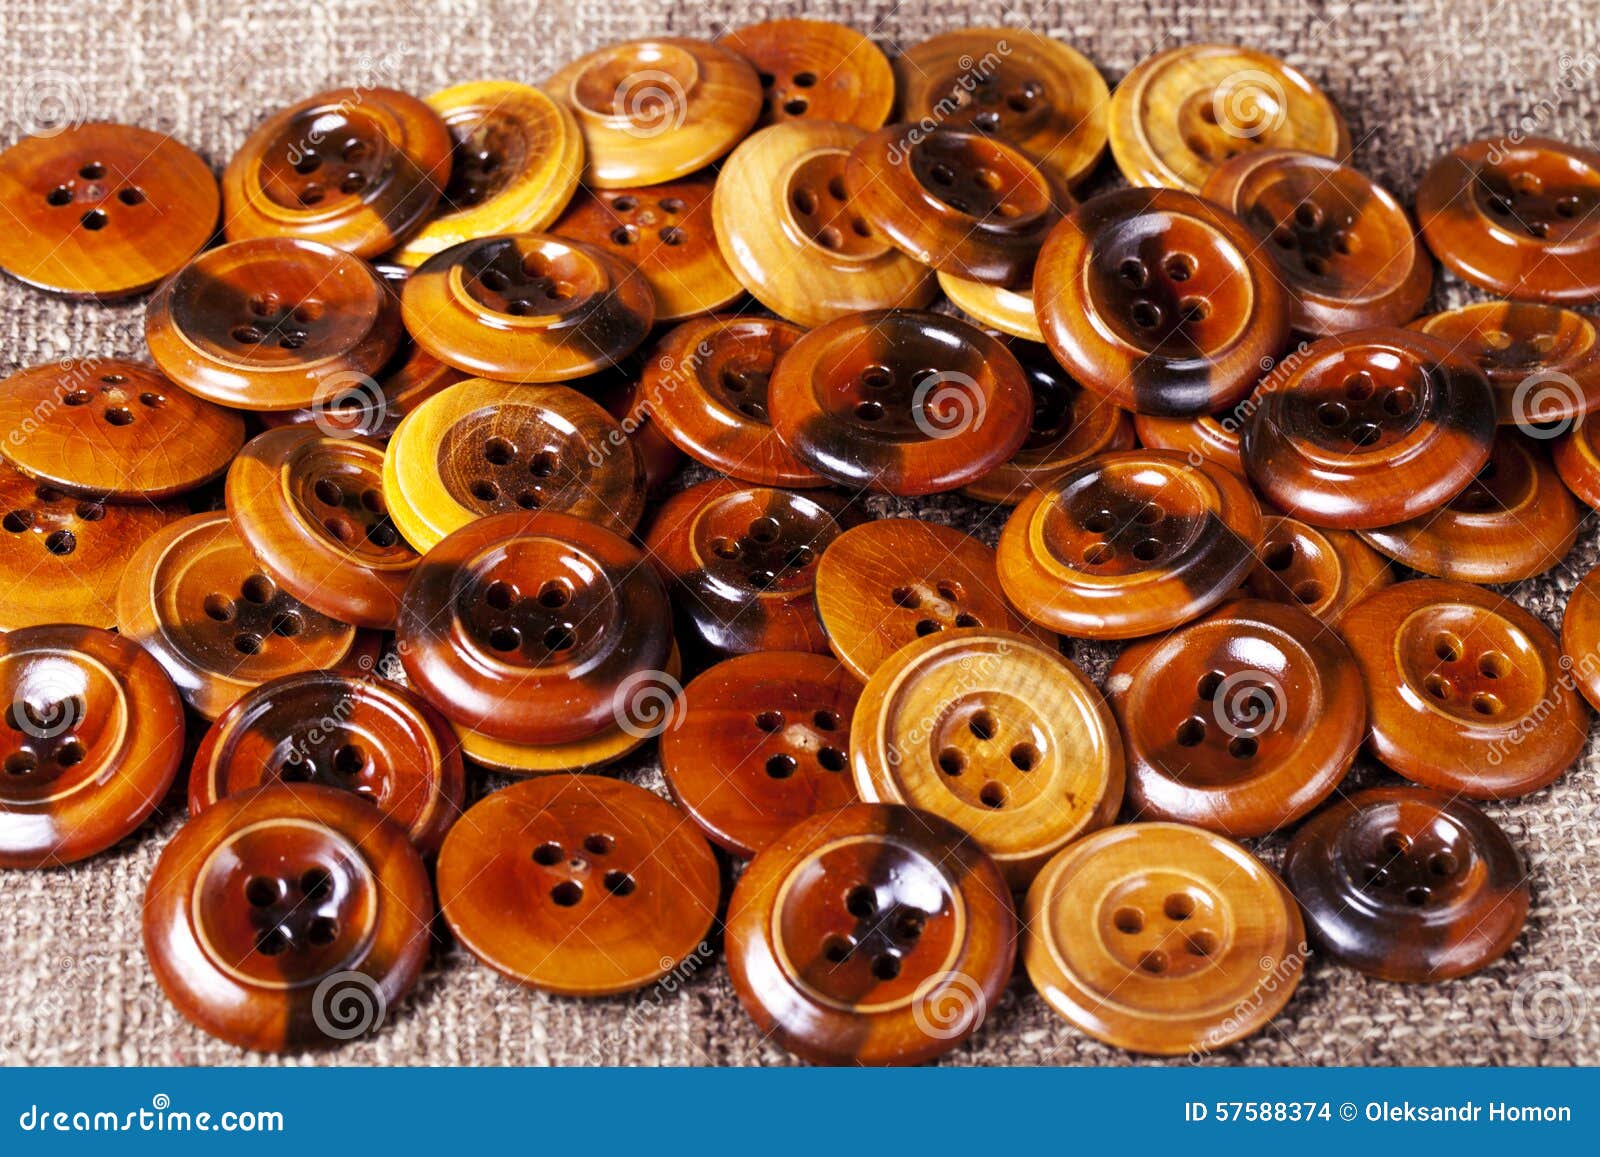 Vintage Wooden Buttons Background Stock Photo - Image of close, button ...